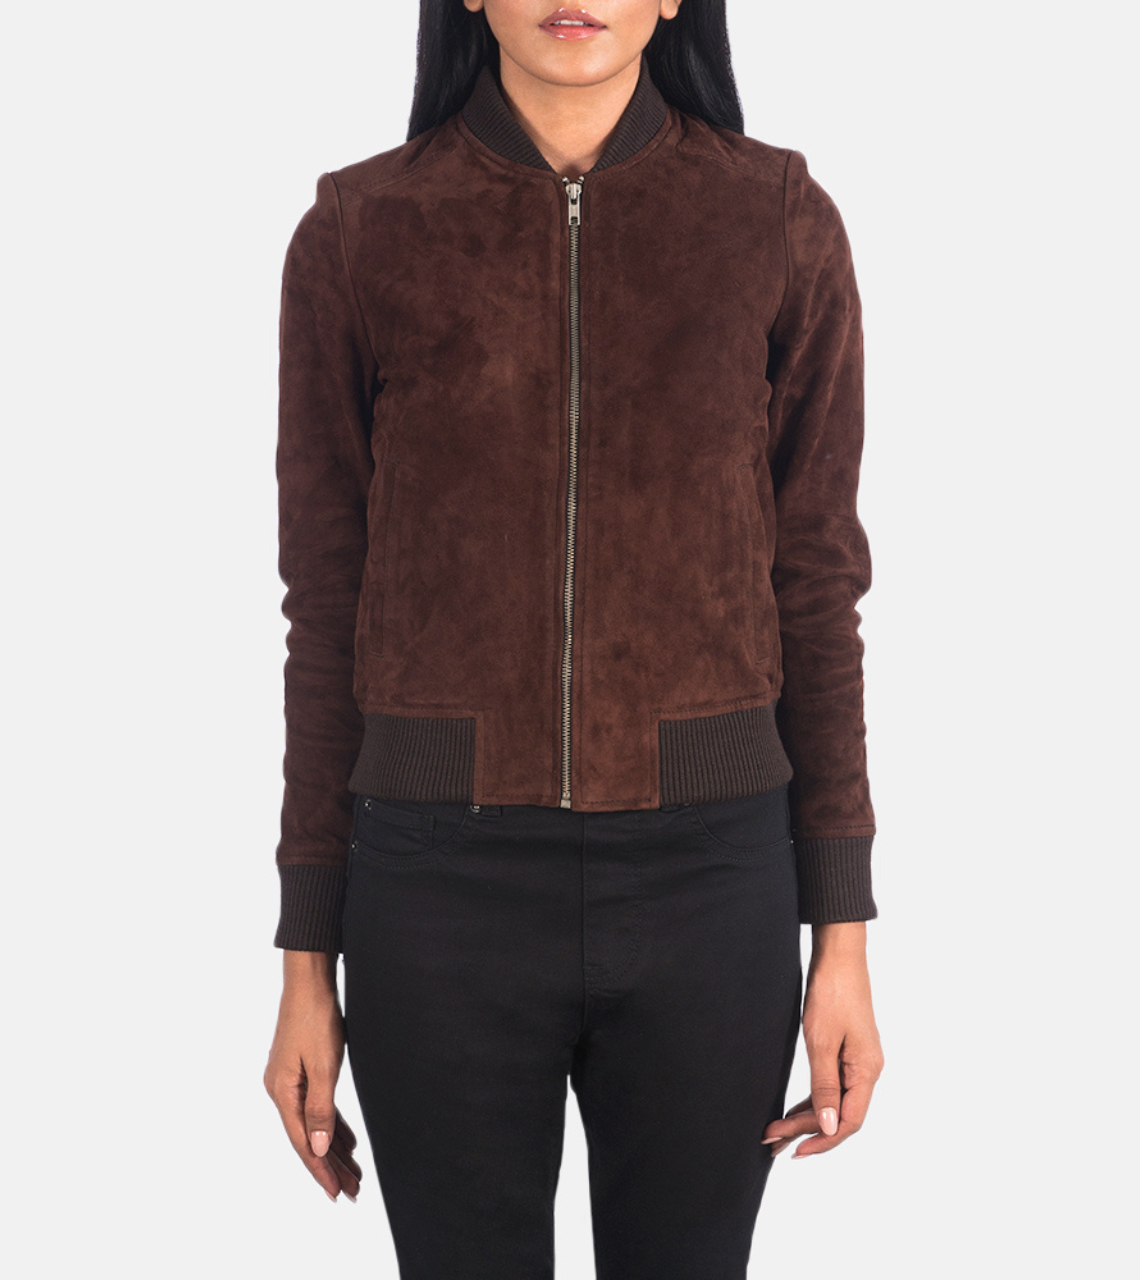 Astrella Women's Brown Bomber Suede leather Jacket